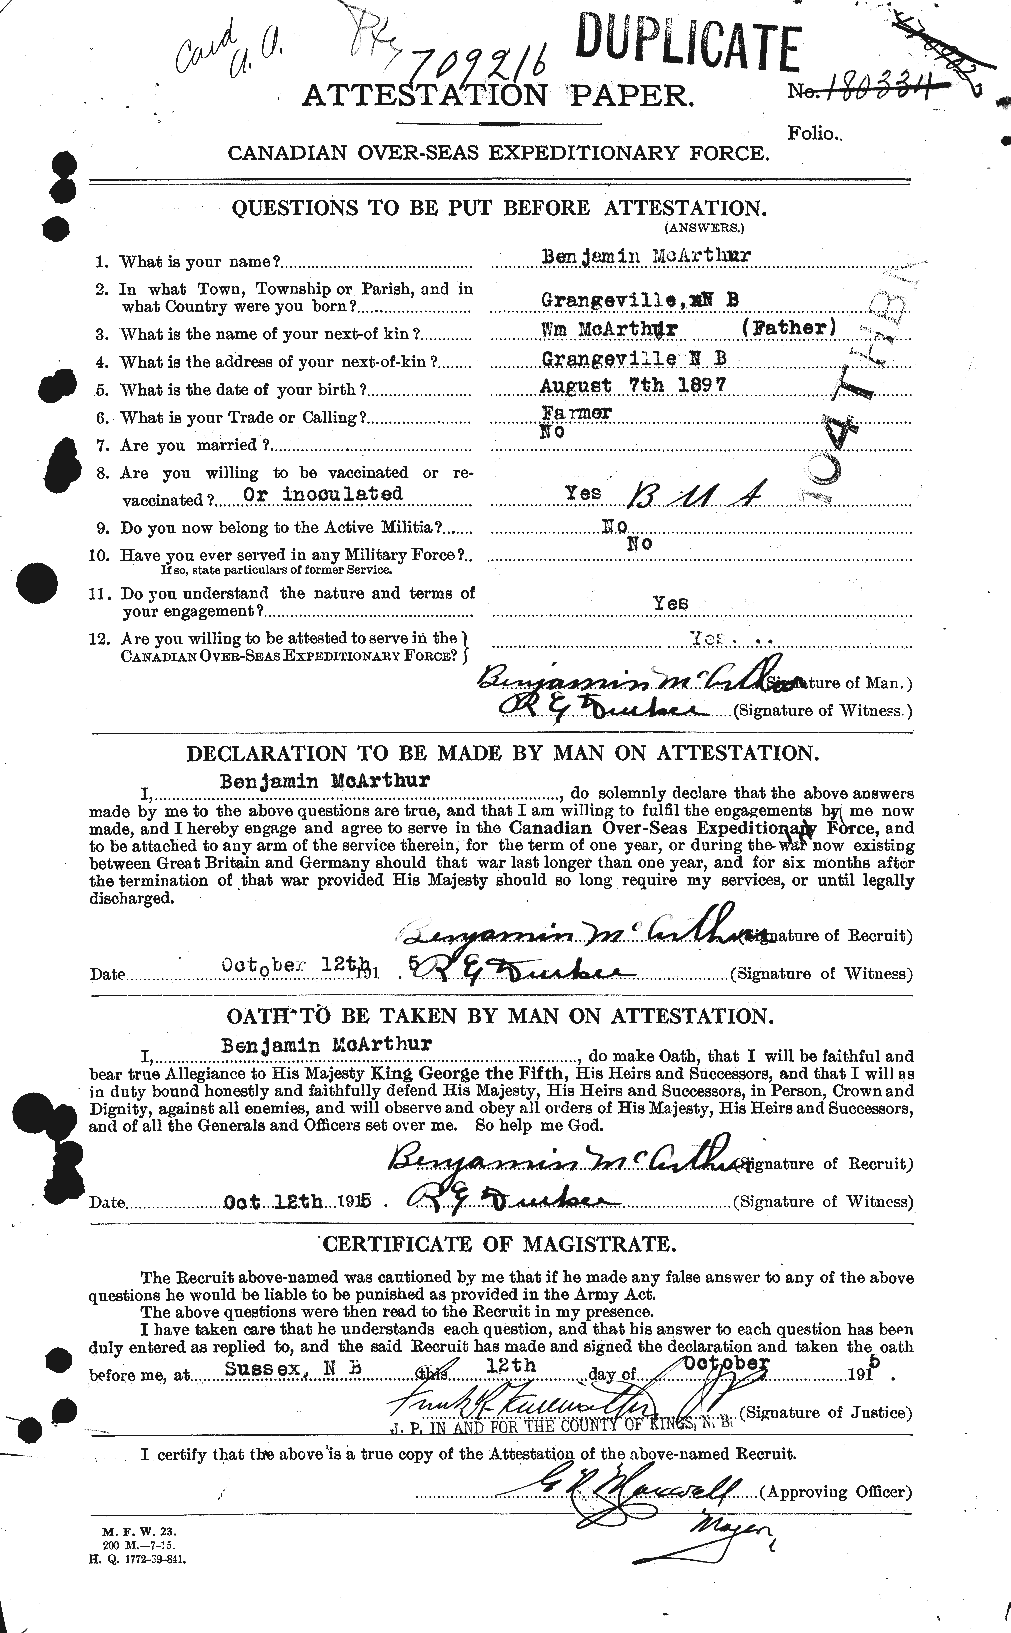 Personnel Records of the First World War - CEF 131125a